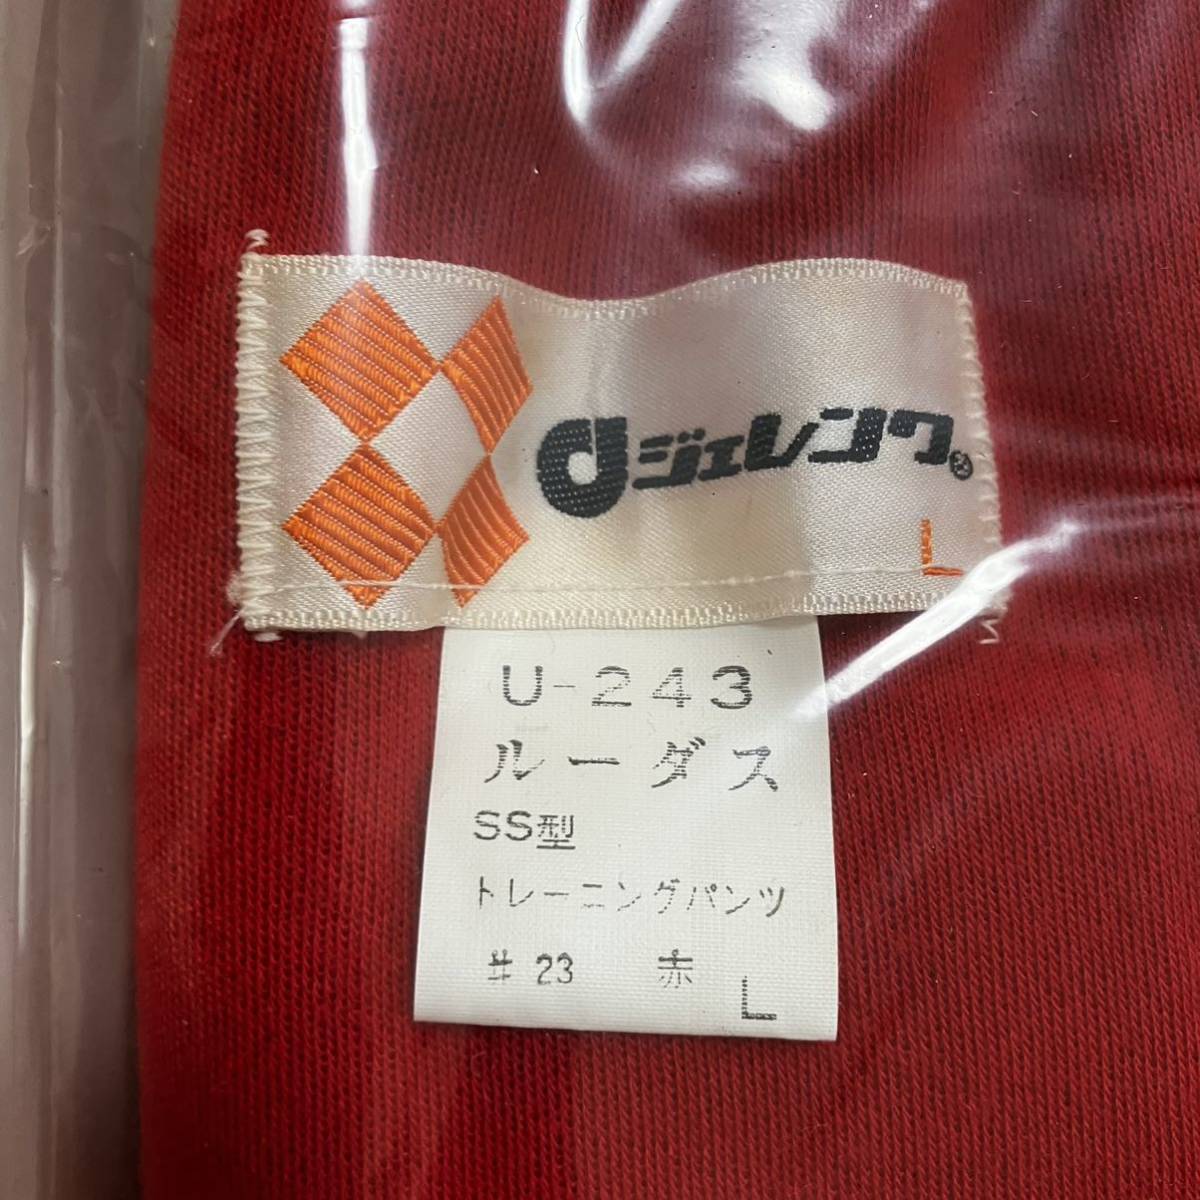 je Len kL size 4ps.@ line red truck jersey jacket top and bottom set long sleeve Vintage Showa Retro Japan regular goods that time thing asics